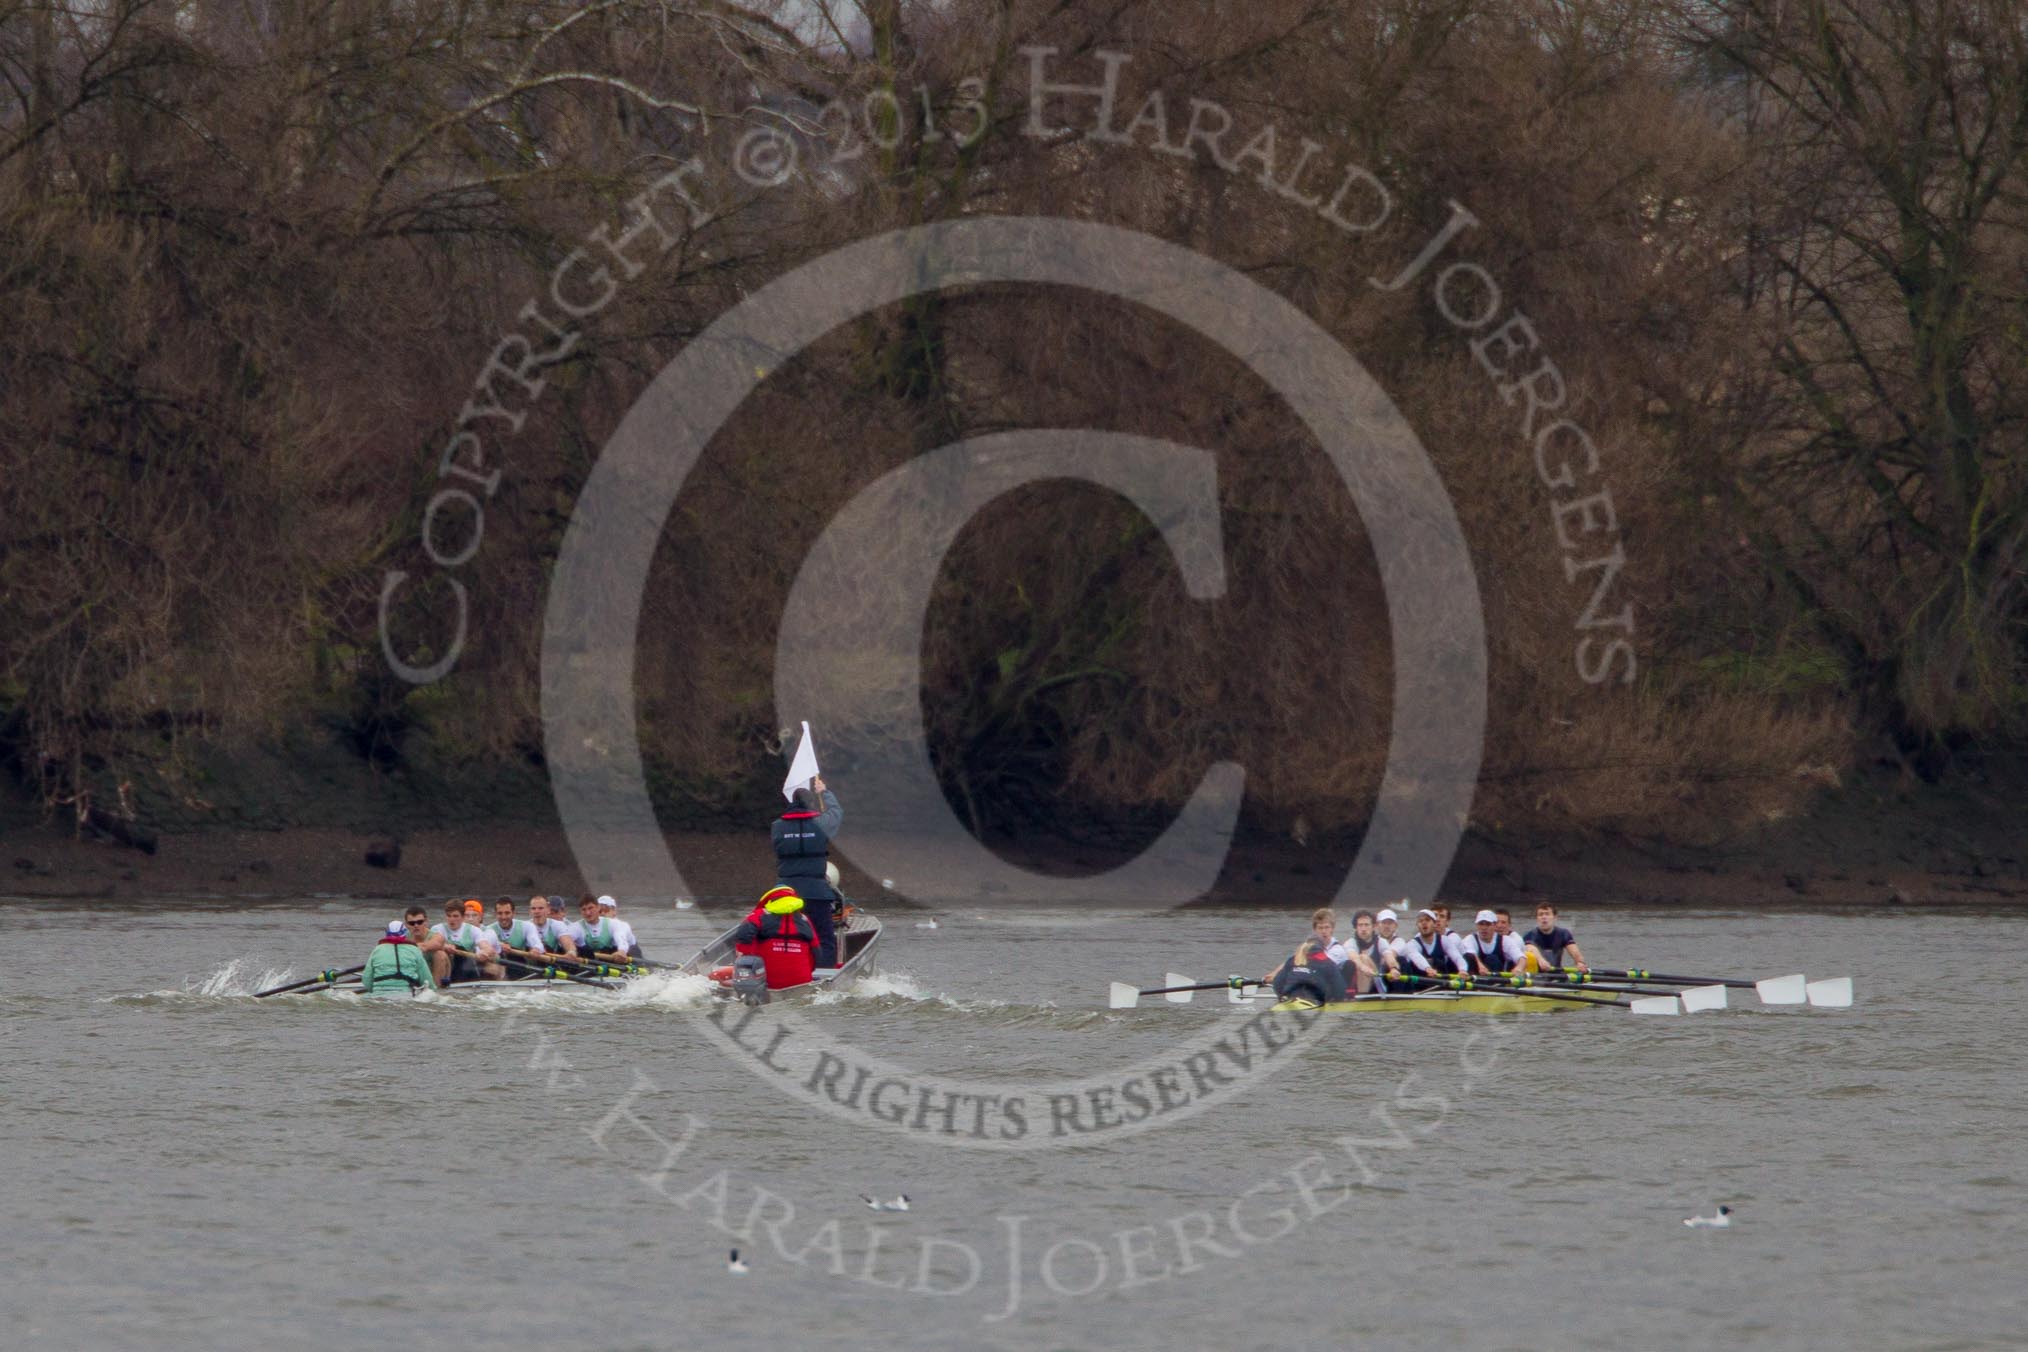 The Boat Race season 2013 - fixture CUBC vs Molesey BC, Goldie vs London RC.
Tideway,
London SW15,

United Kingdom,
on 16 March 2013 at 15:12, image #70